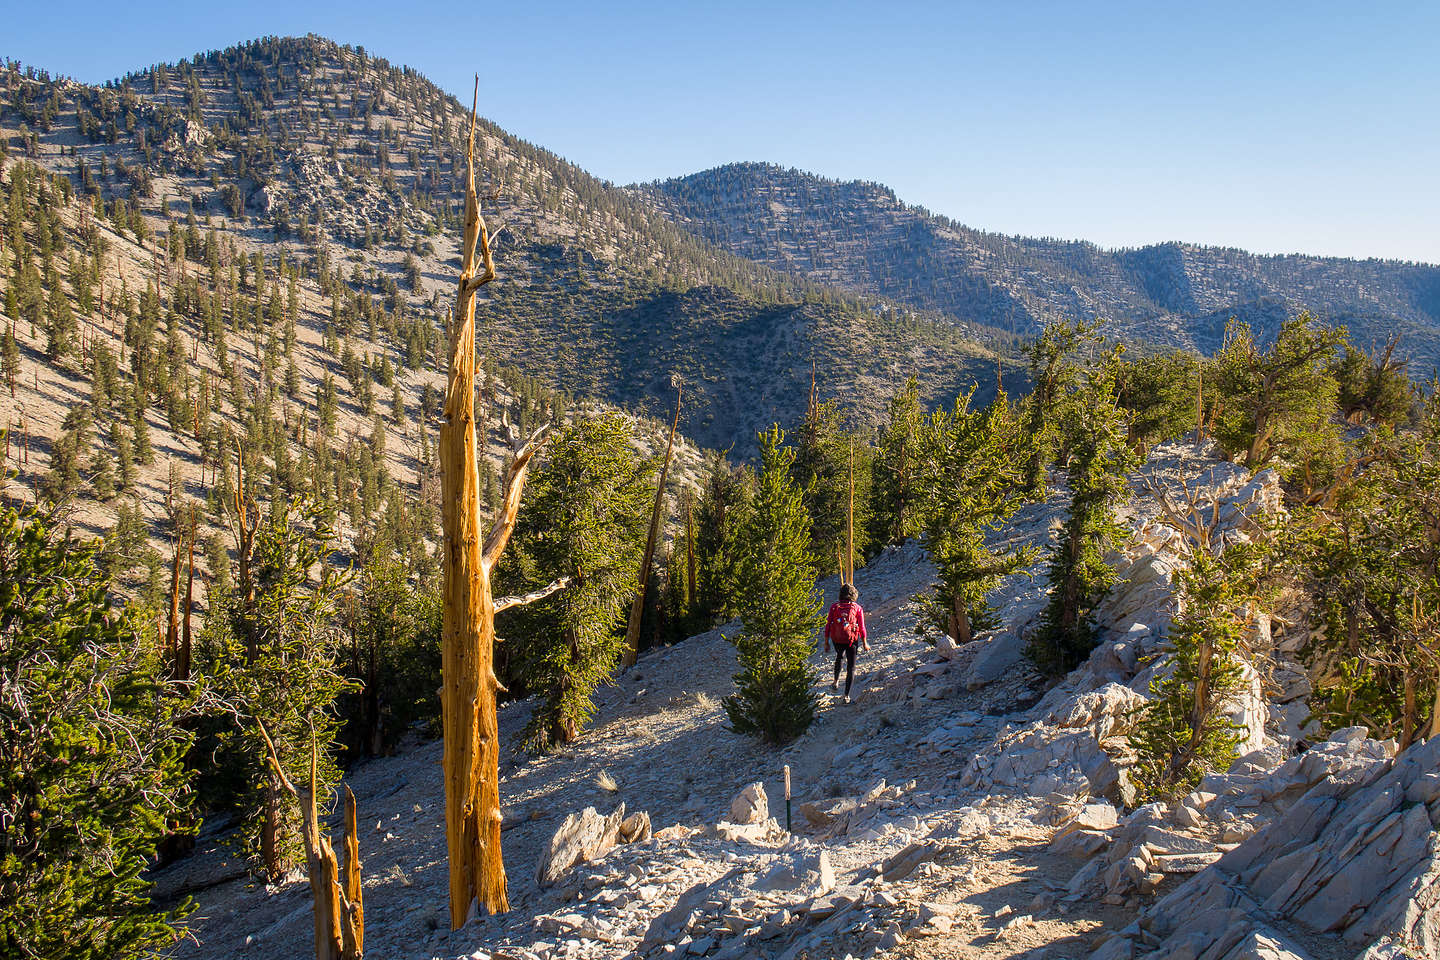 Lolo sets out on the Methuselah Trail